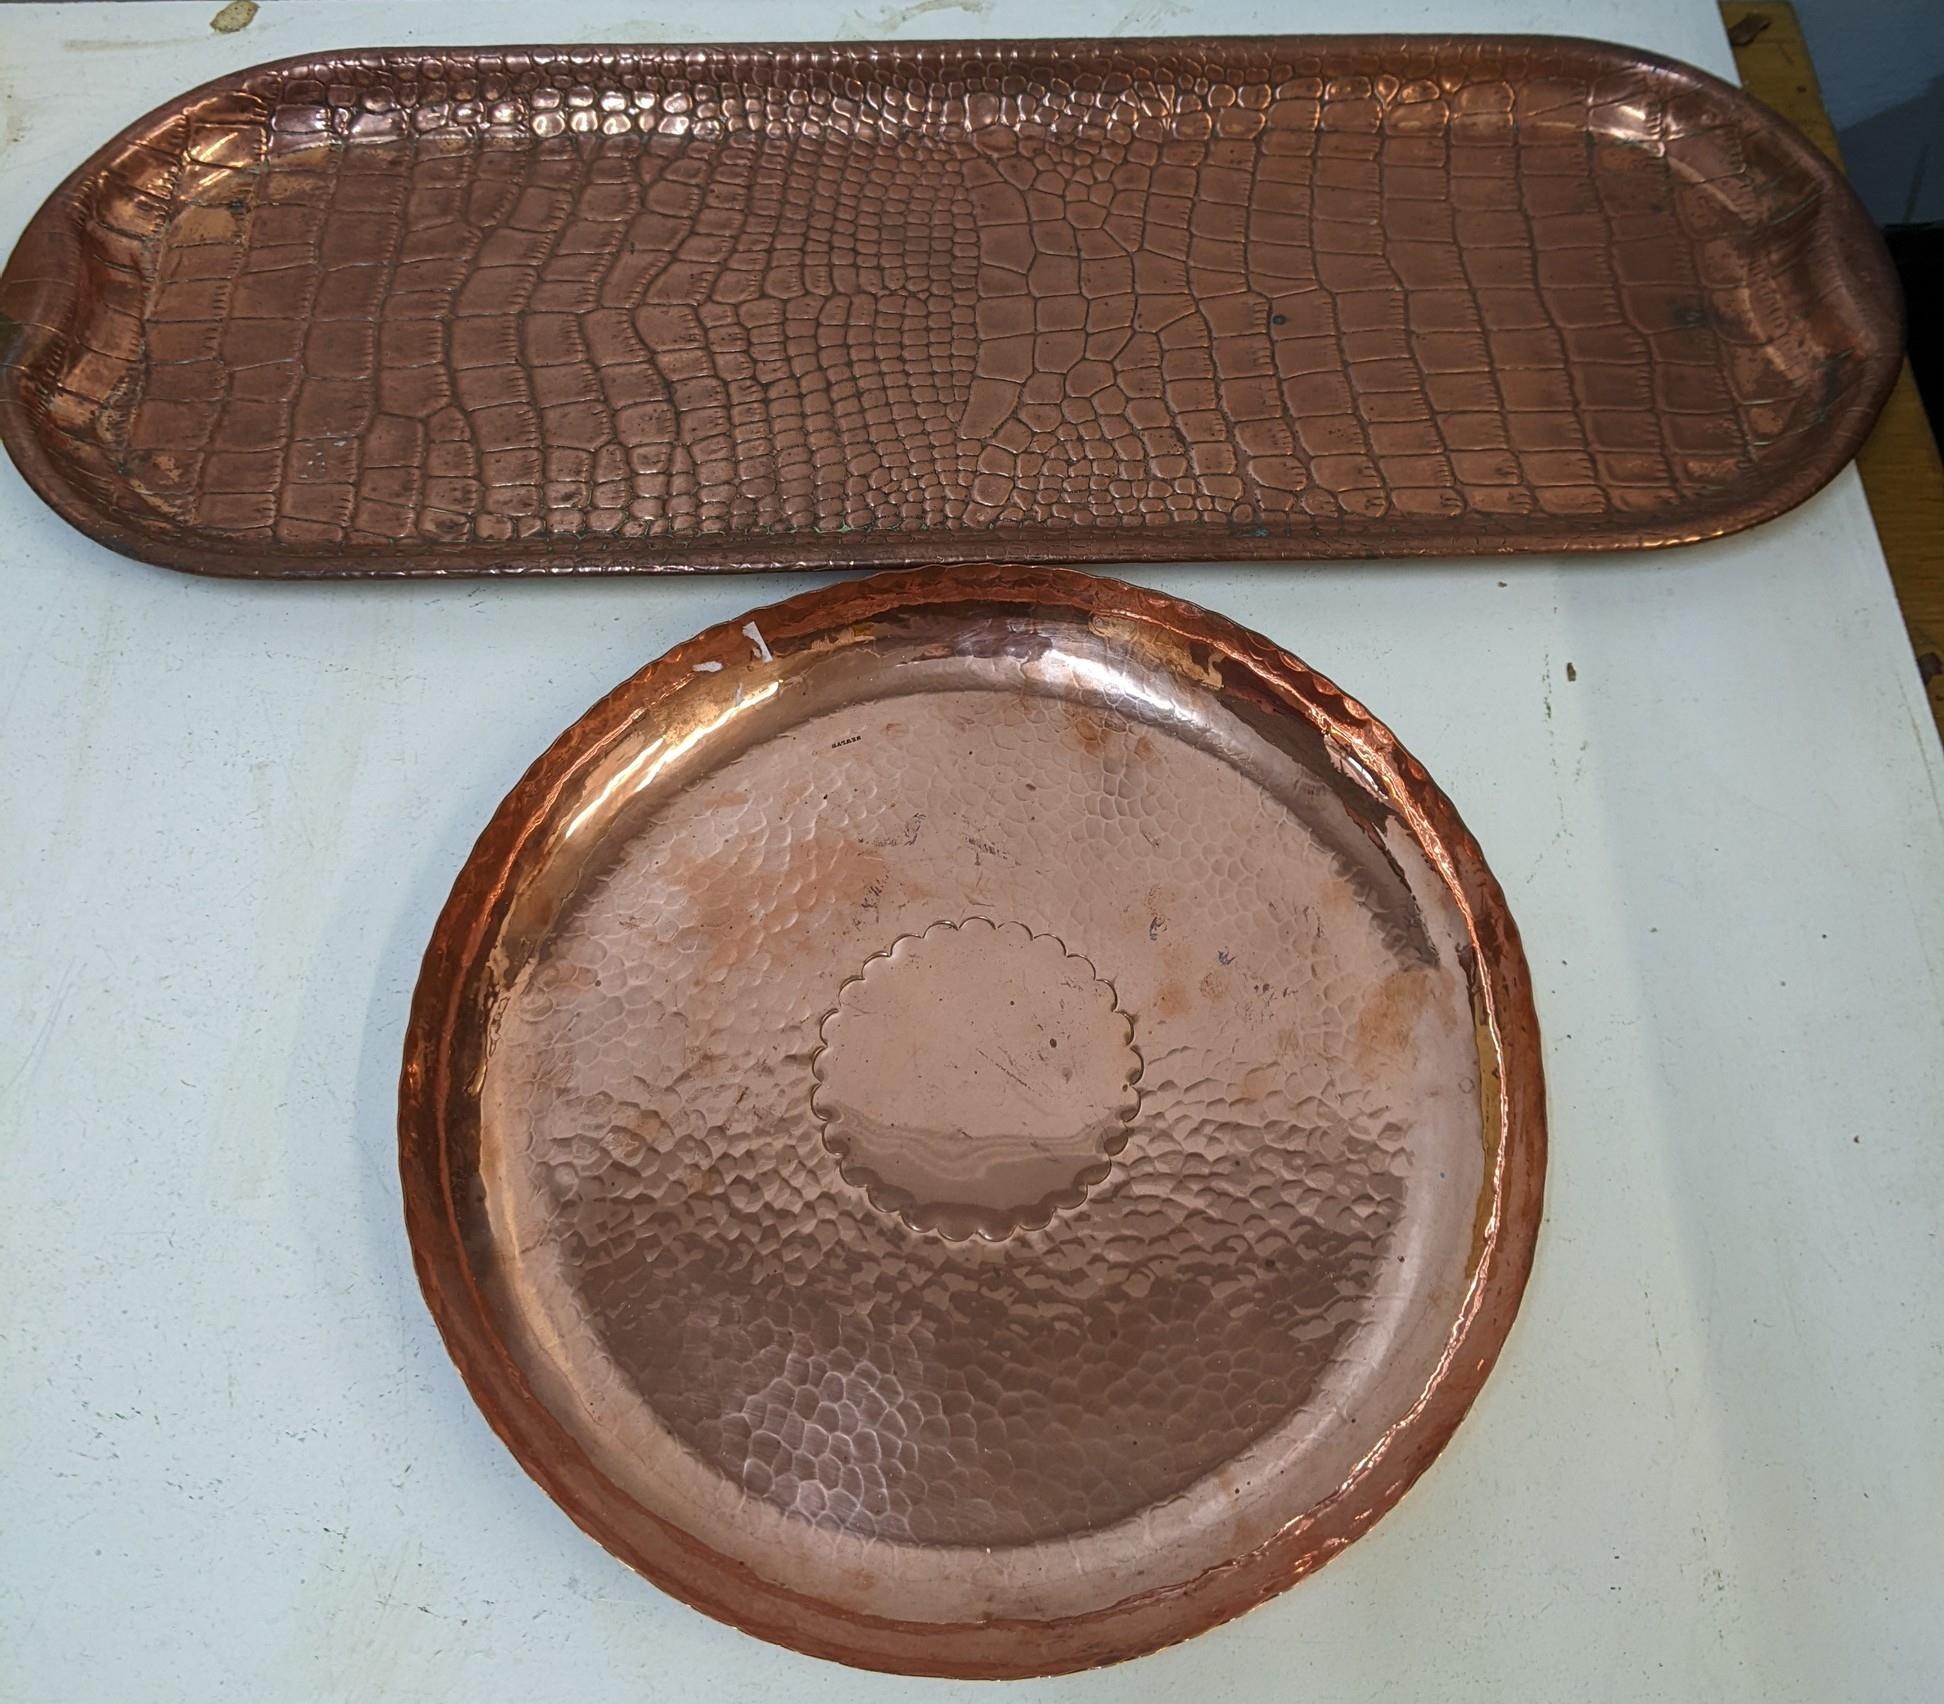 A Newlyn copper tray with spot hammered decoration and a Joseph Sankey & Son copper crocodile skin